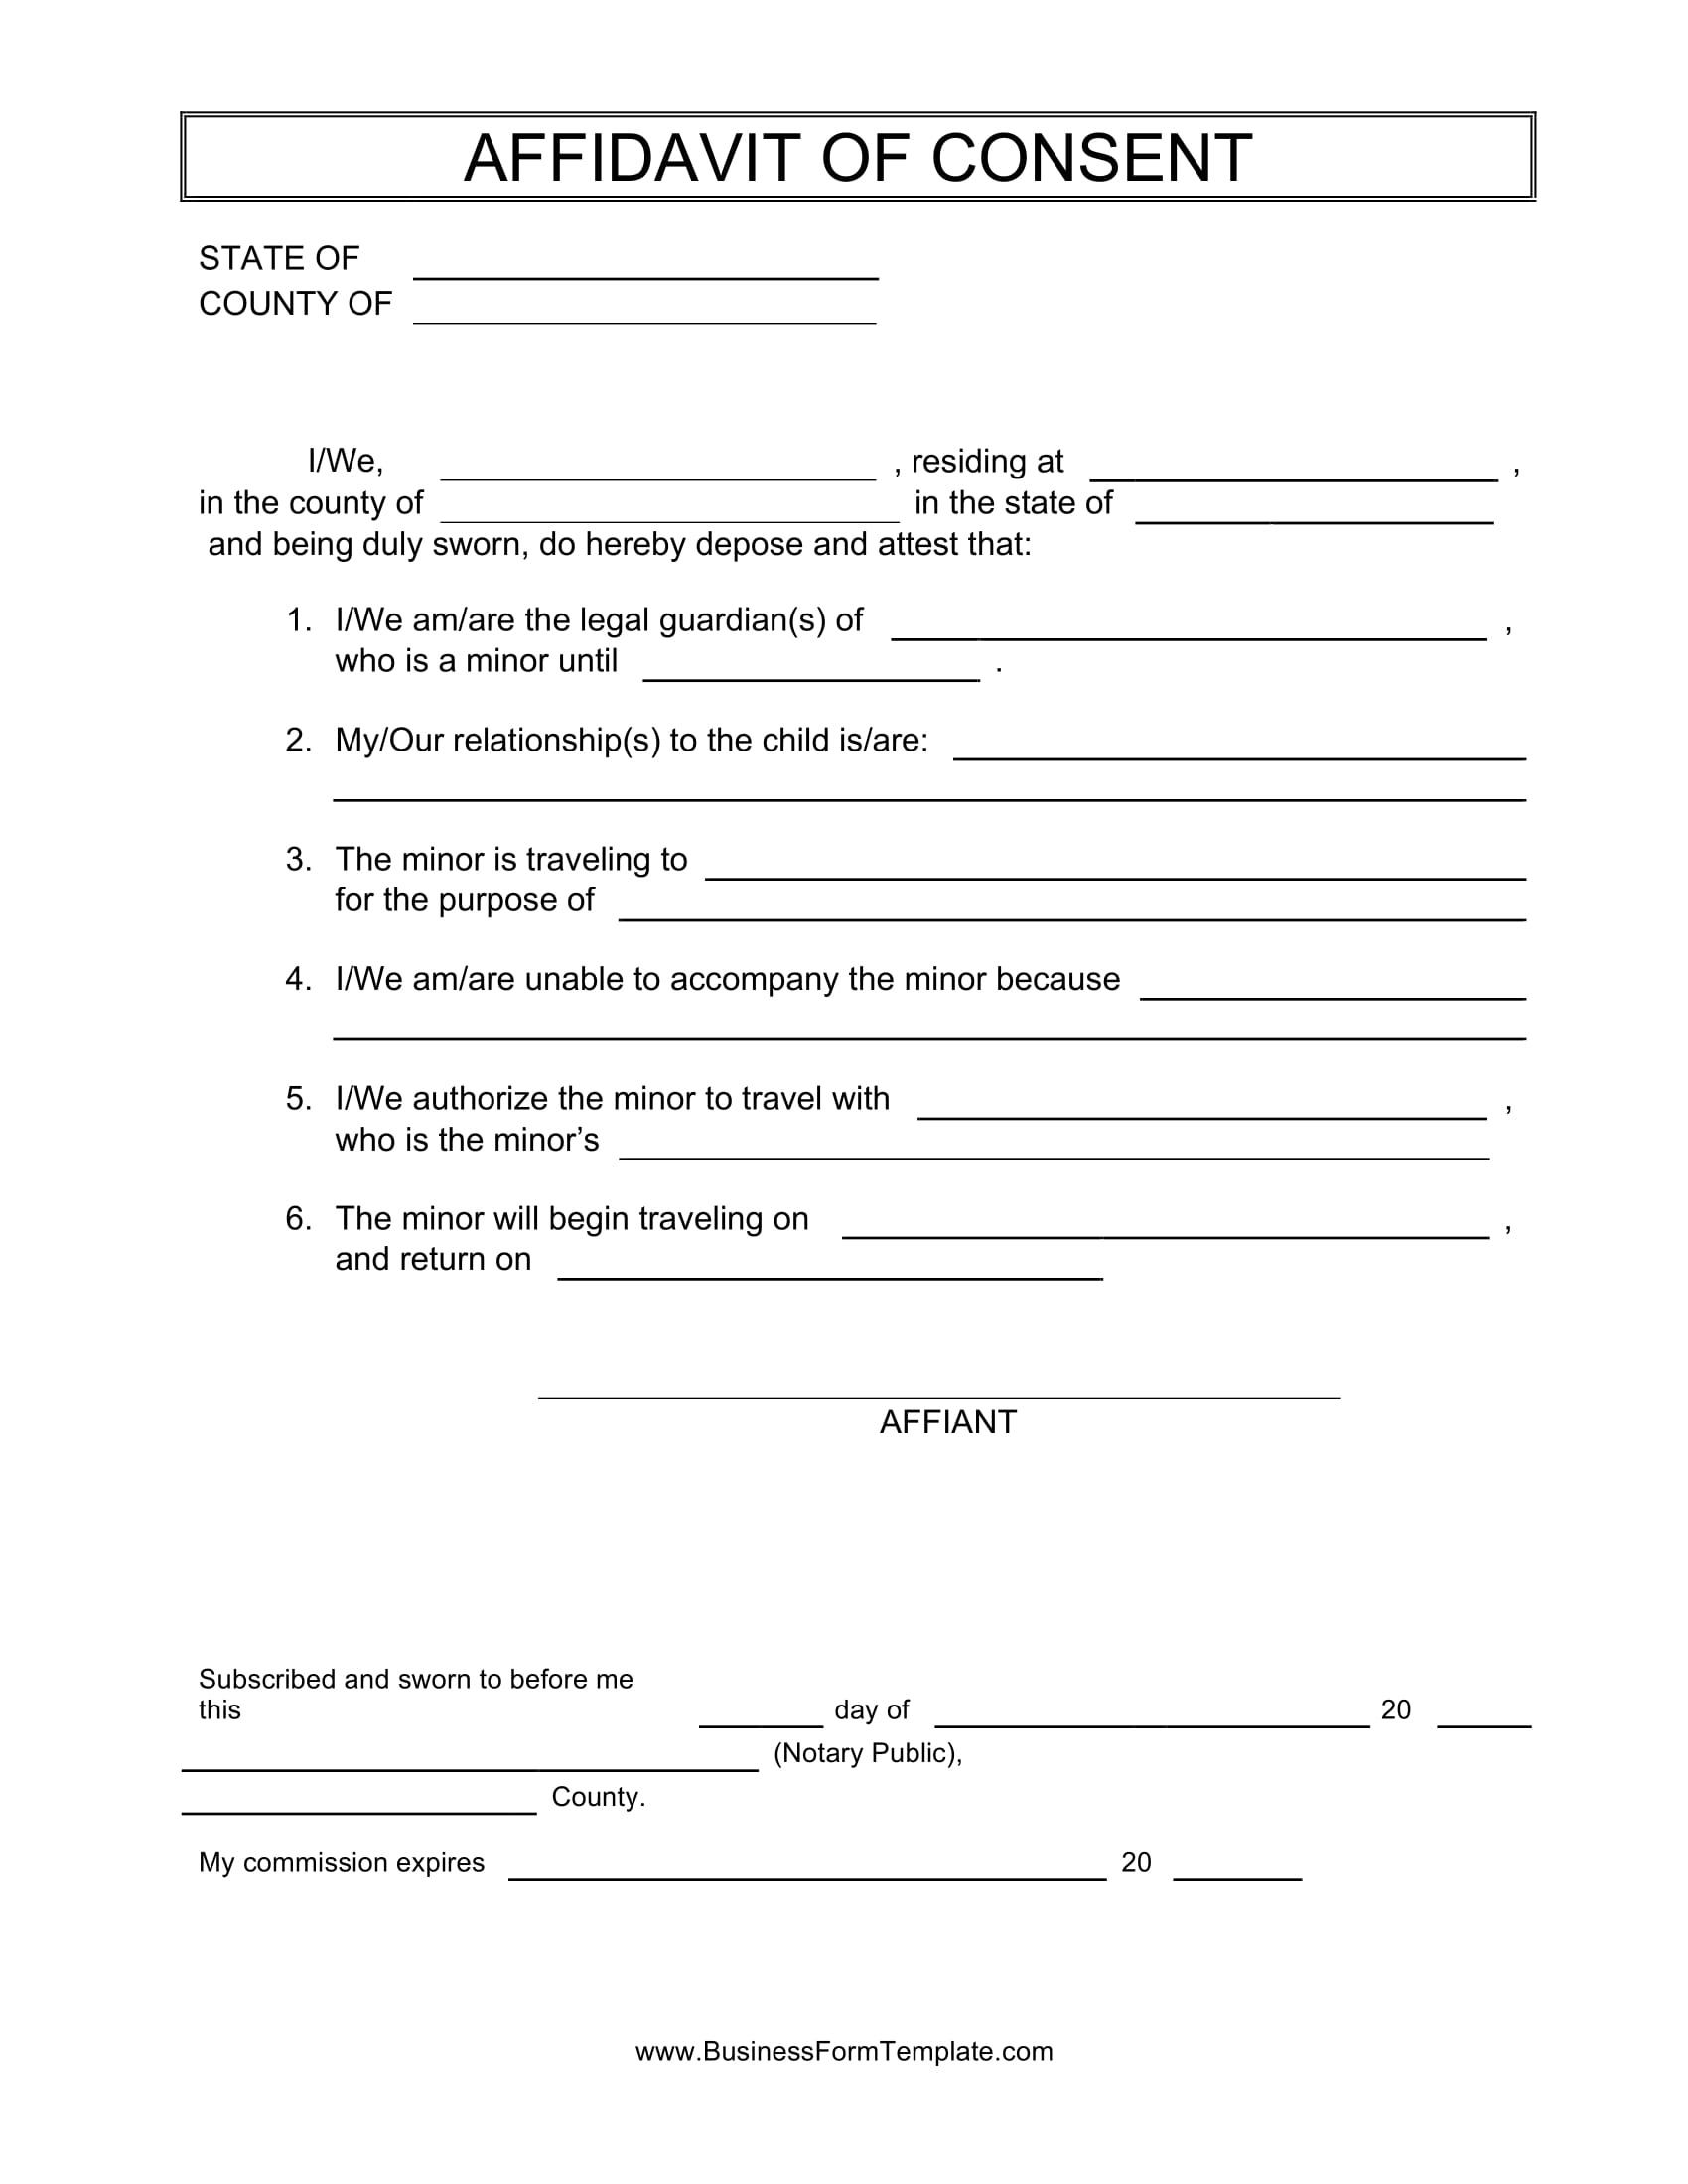 Affidavit Of Consent 10 Examples Format Pdf Examples 3608